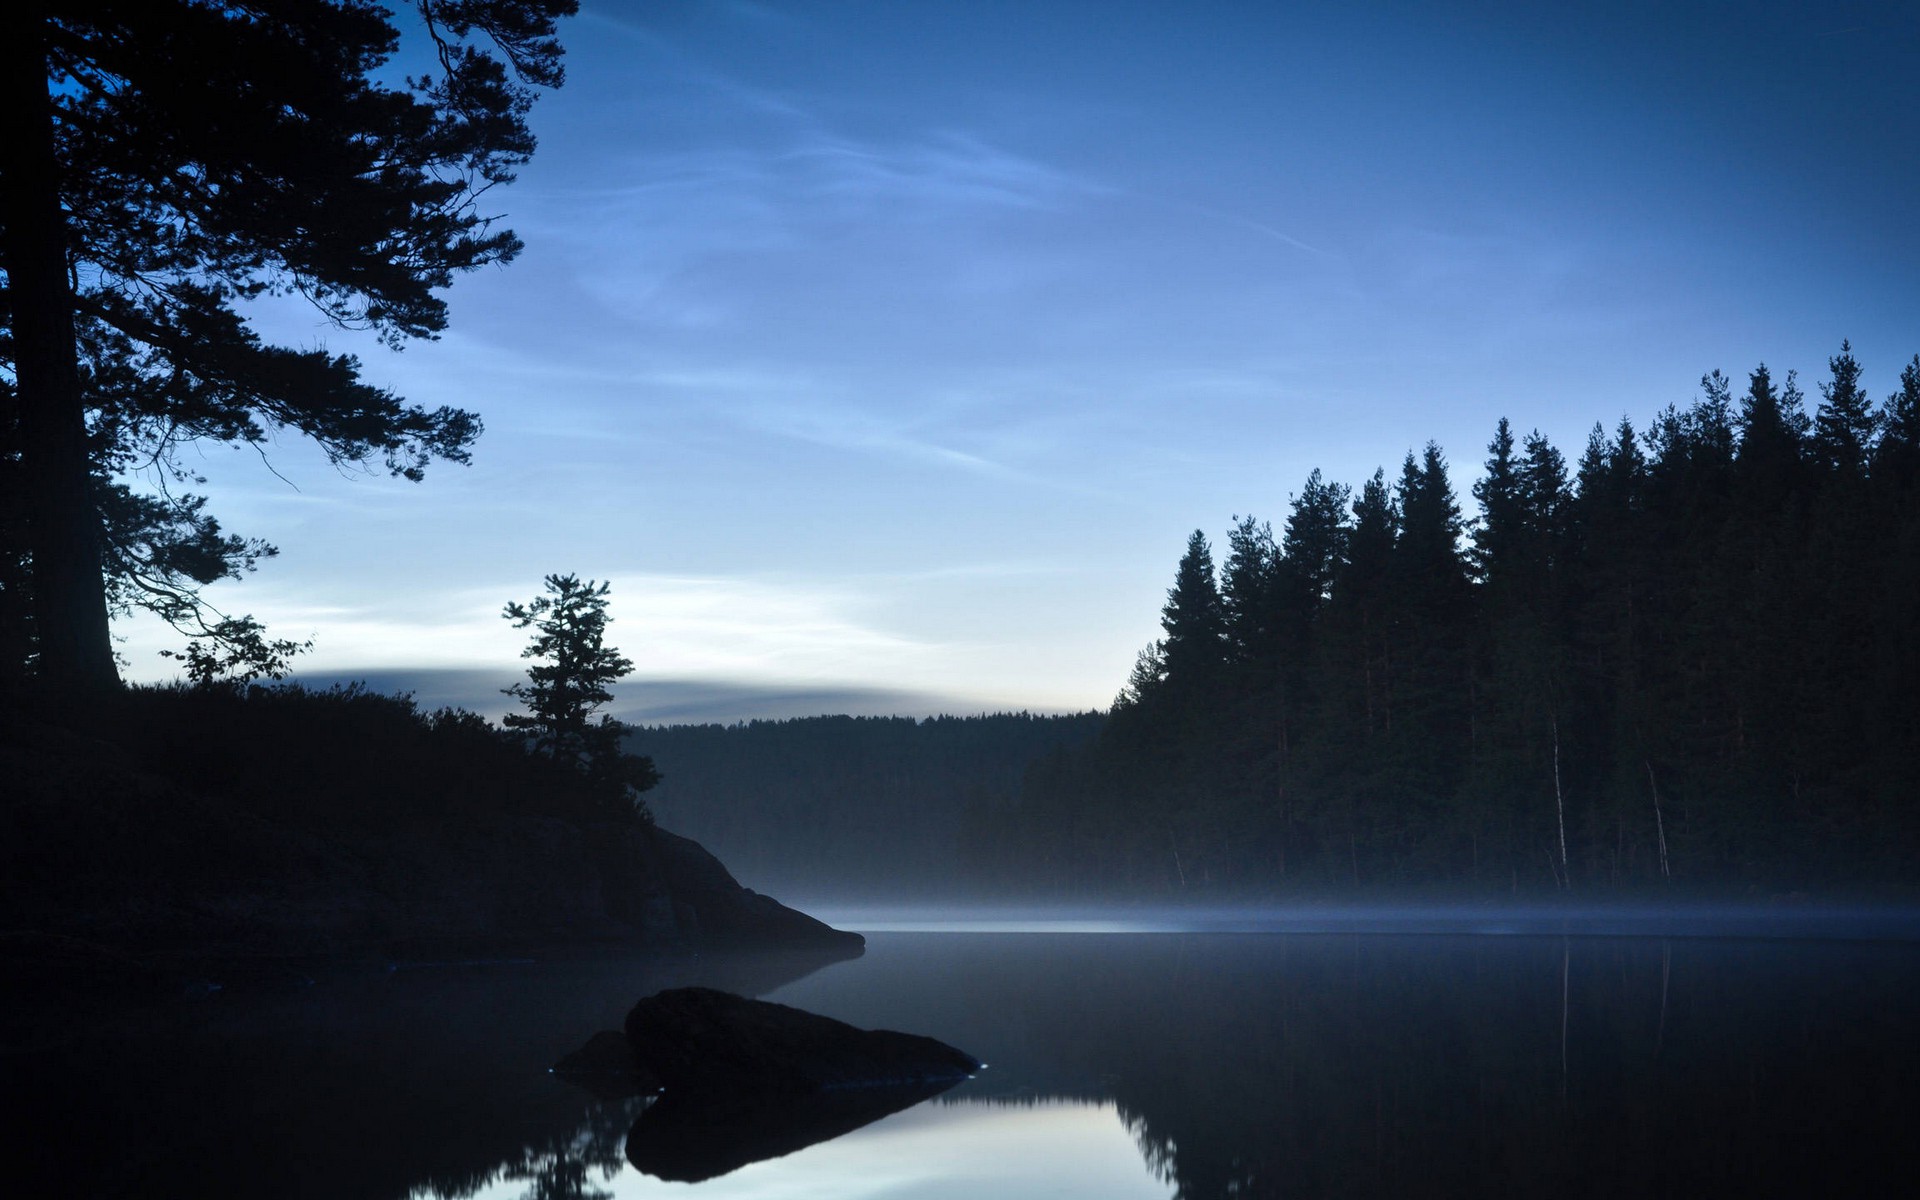 landscape, Nature, Evening, Blue, Lake, Calm, Water, Reflection, Pine Trees, Trees, Forest, Silhouette Wallpaper